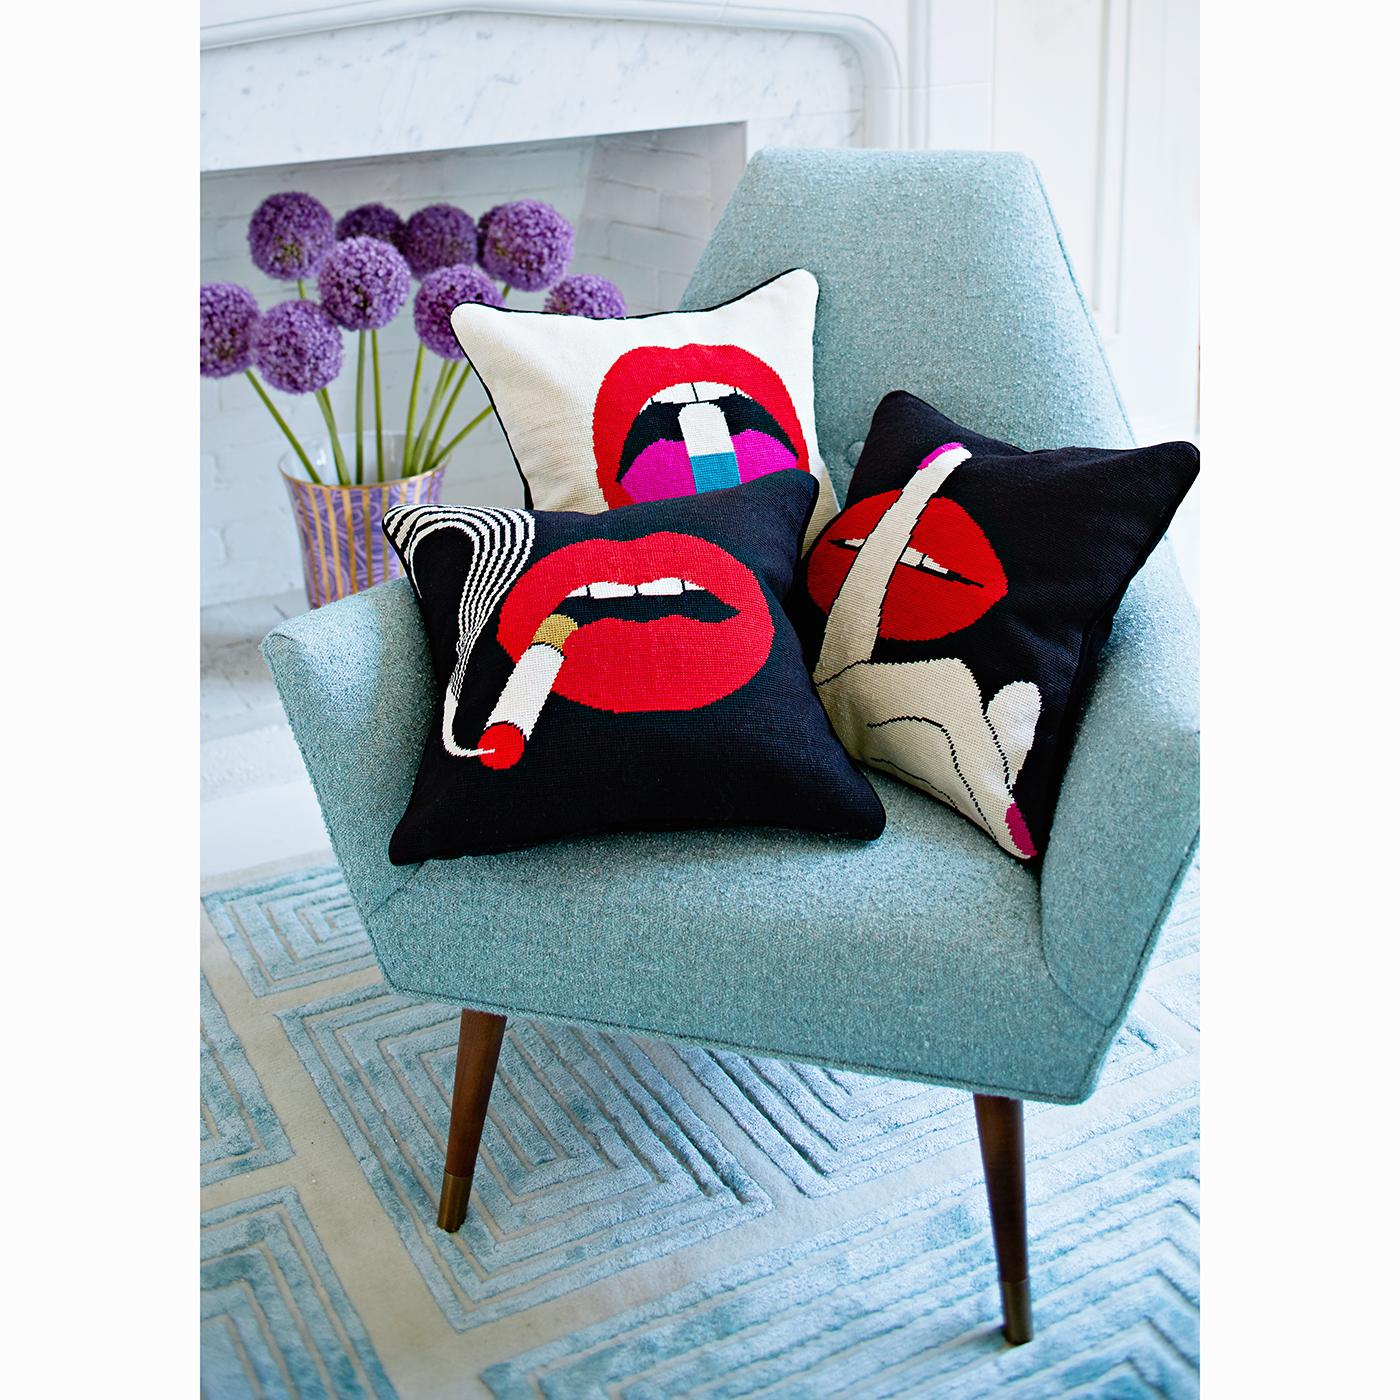 Lip Service. Trippy motifs put your sofa in a trance. Bold red lips demonstrate a trio of vices (or virtues, depending on who you ask).

A marriage of traditional and Mod style, our lips needlepoint pillows are the perfect punctuation for your